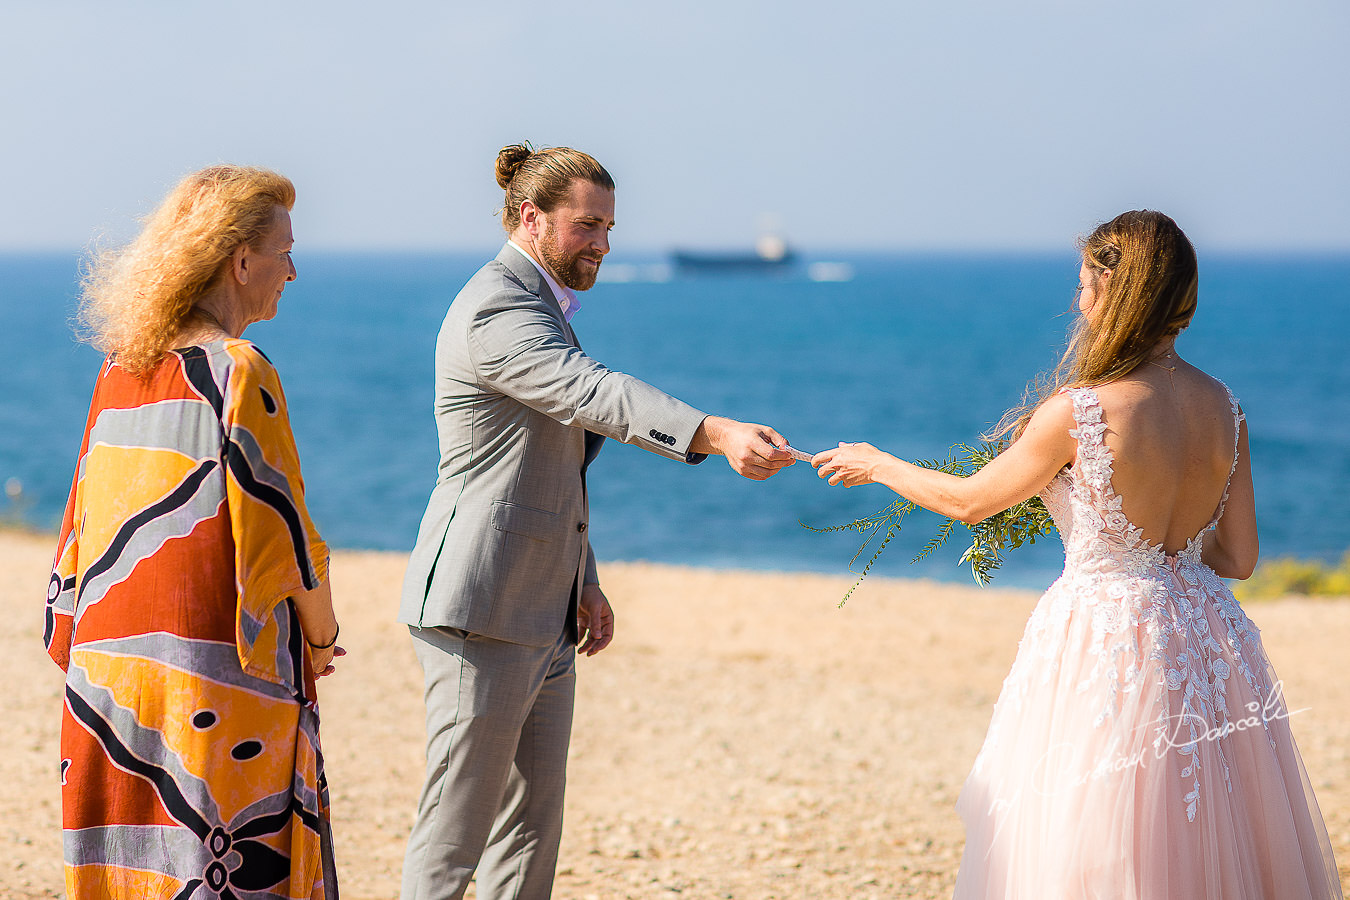 The bride and groom changing vows, moments captured by Cyprus Wedding Photographer Cristian Dascalu.